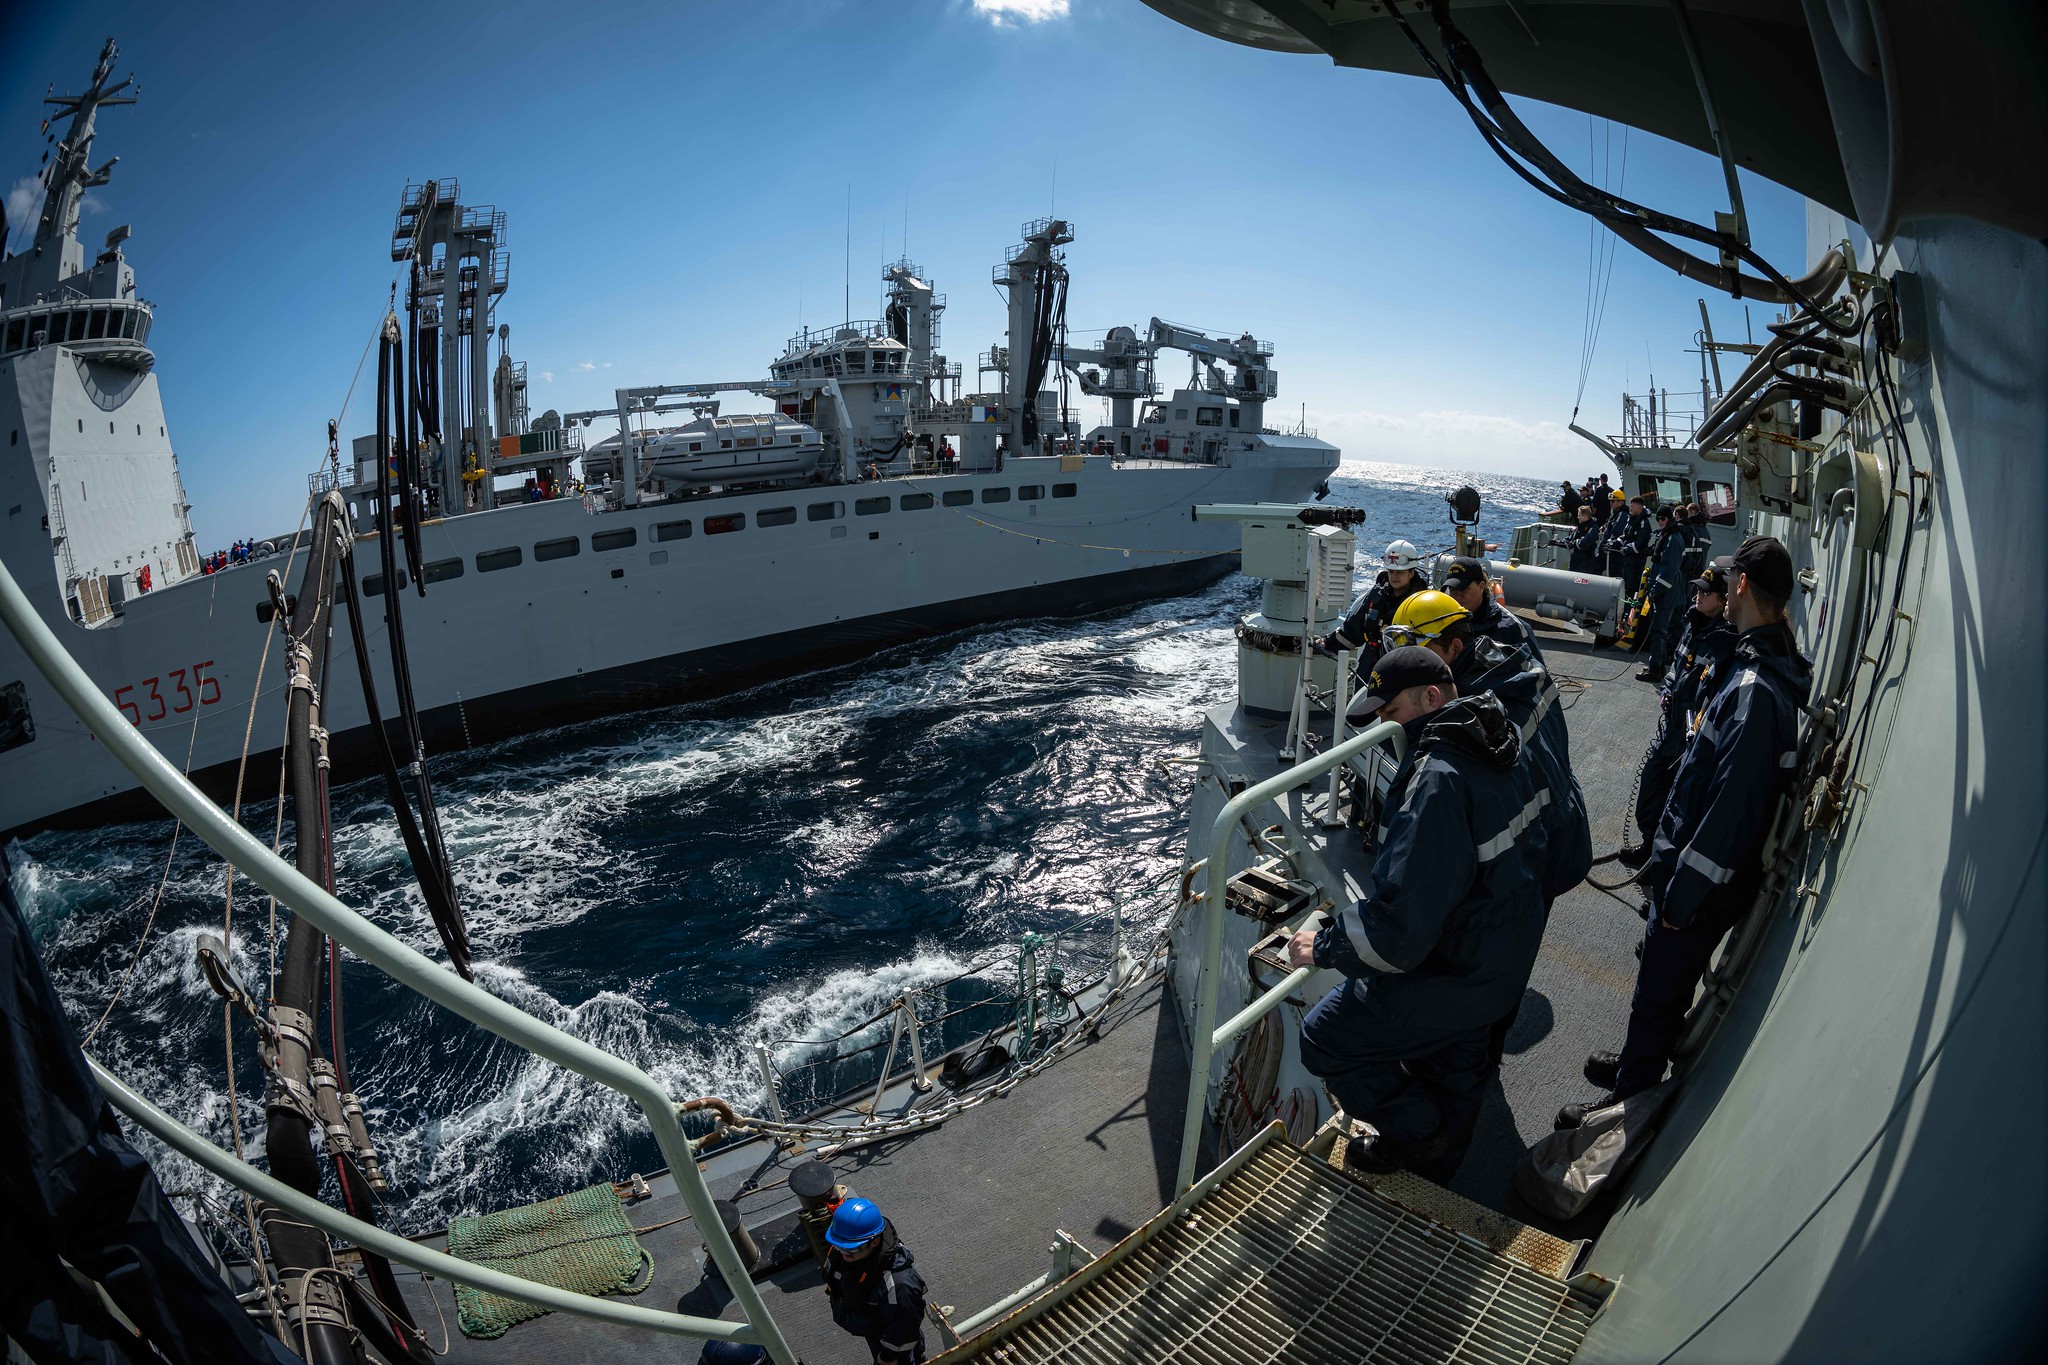 Operation REASSURANCE-MTF <br>HMCS MONTREAL conducts a replenishment at sea with ITS Vulcano during Operation REASSURANCE, in the Mediterranean Sea on March 15, 2022. (Photo: Corporal Braden Trudeau Canadian Armed Forces)